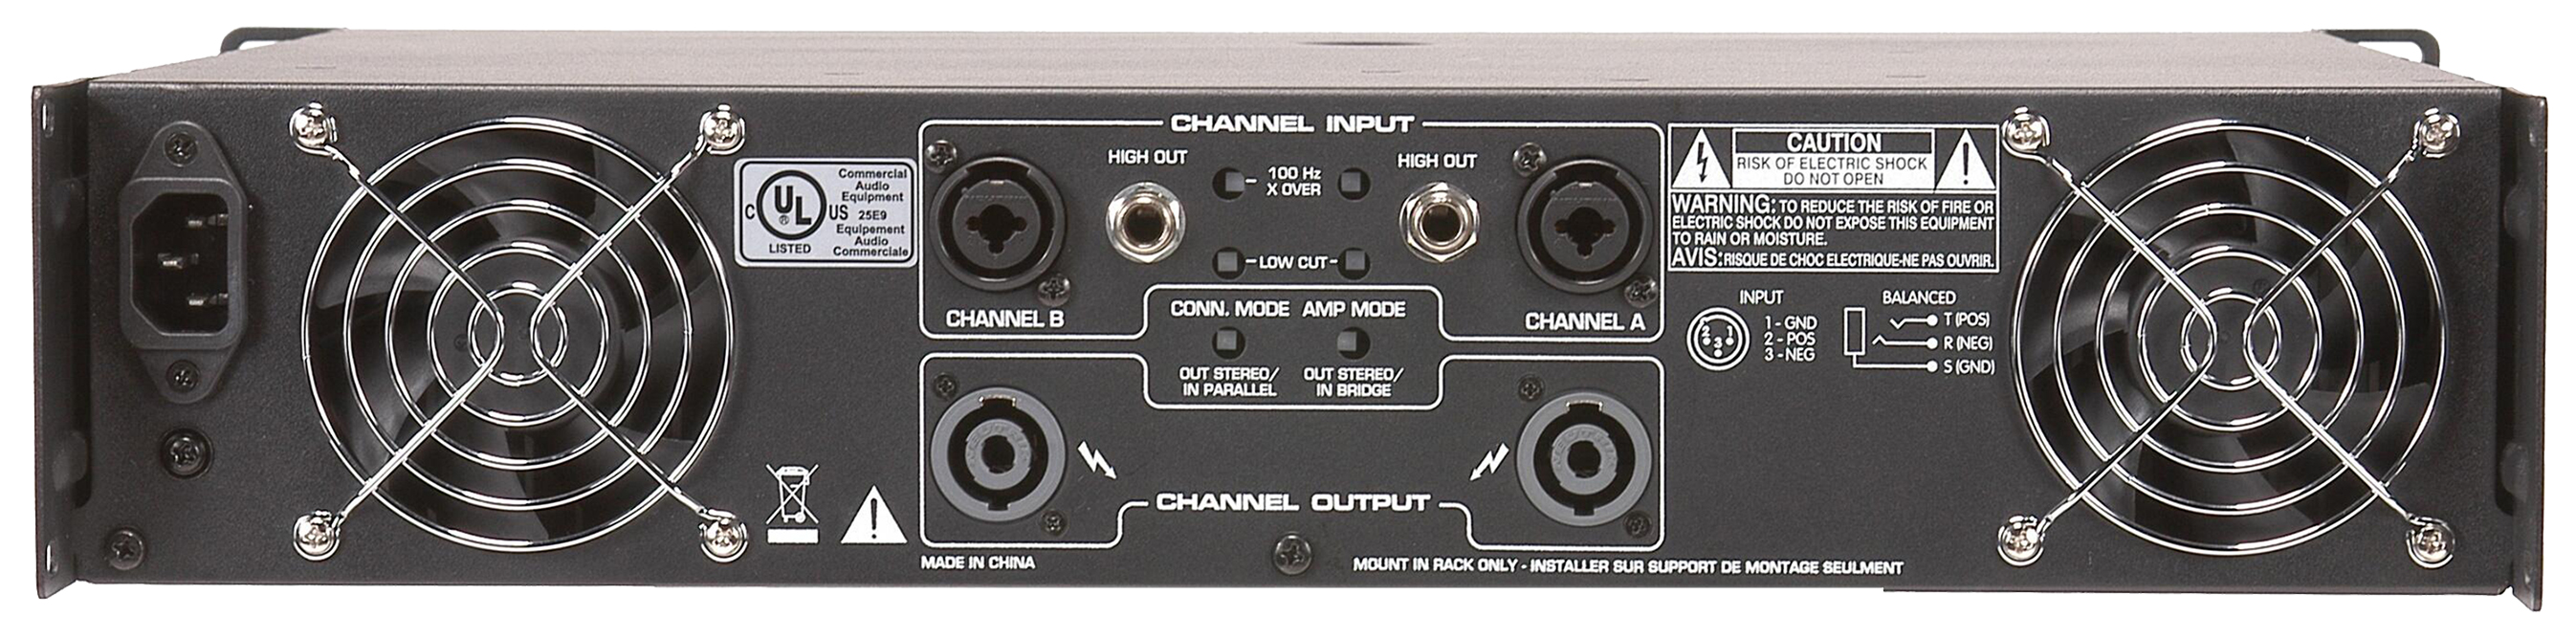 CPX™ 3800 – Peavey Commercial Audio